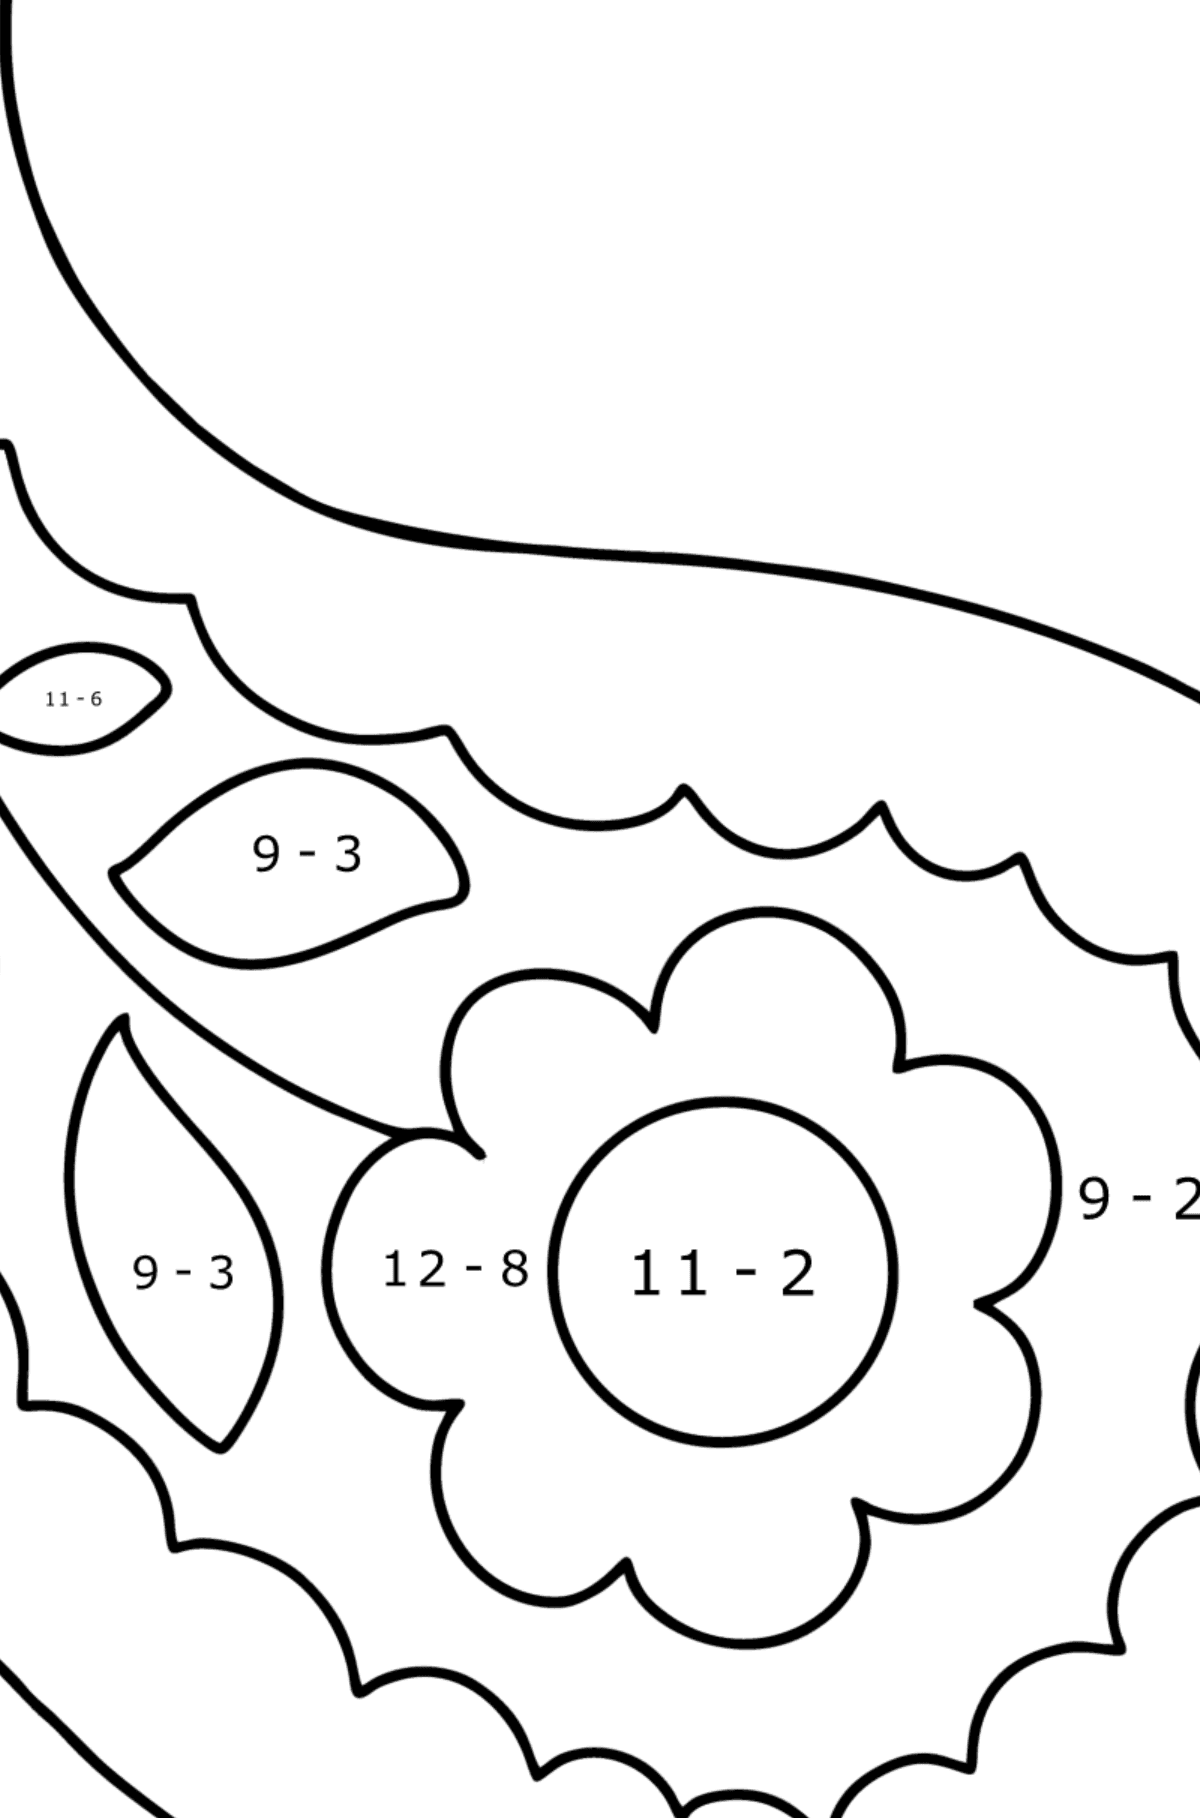 Paisley coloring page for baby - Math Coloring - Subtraction for Kids